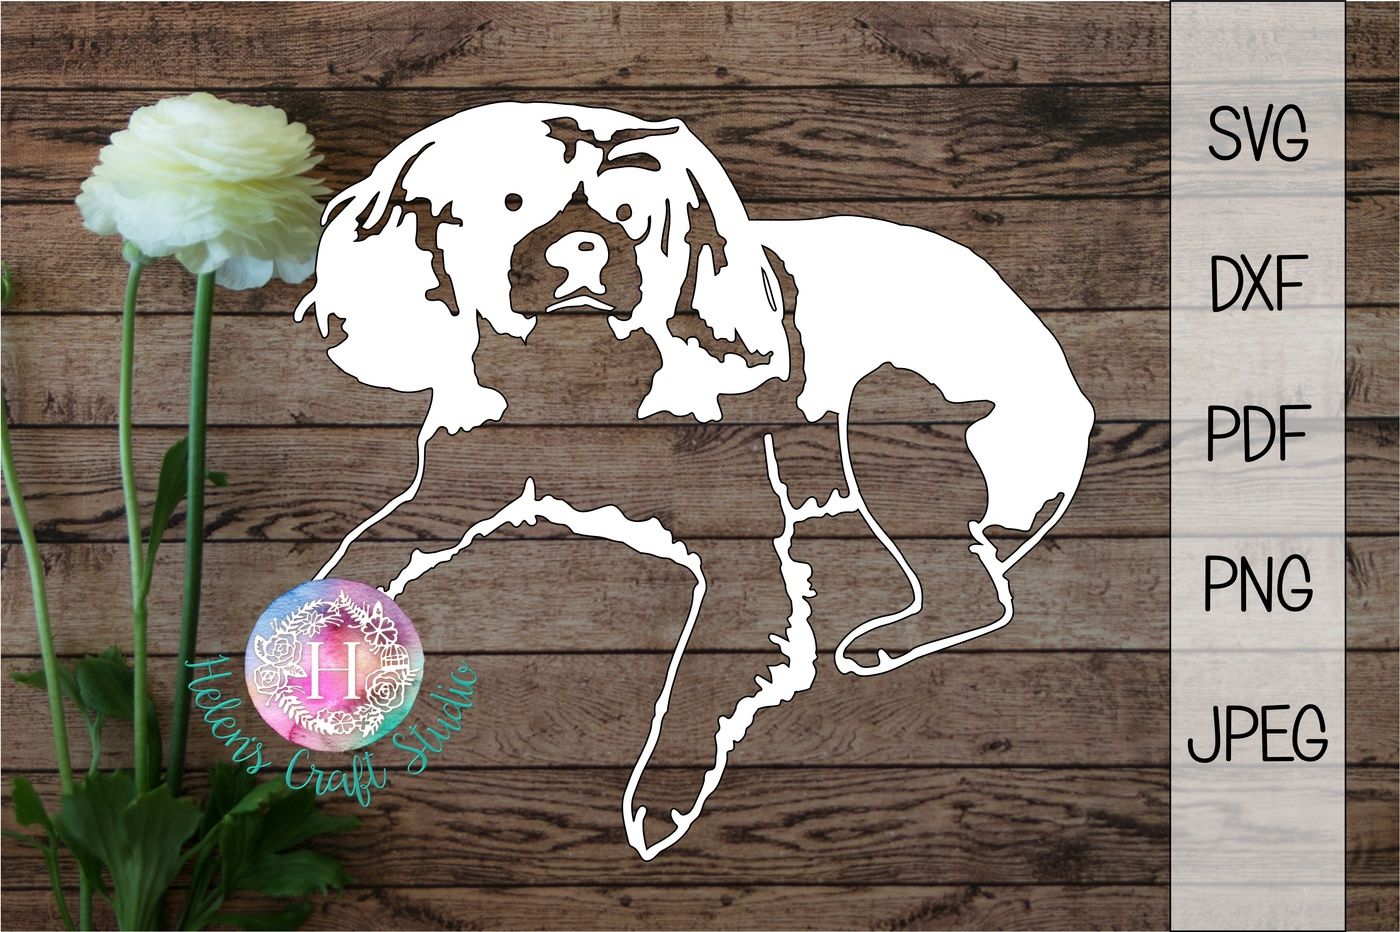 Cavalier King Charles Spaniel SVG, DXF, PDF, PNF and JPEG ...